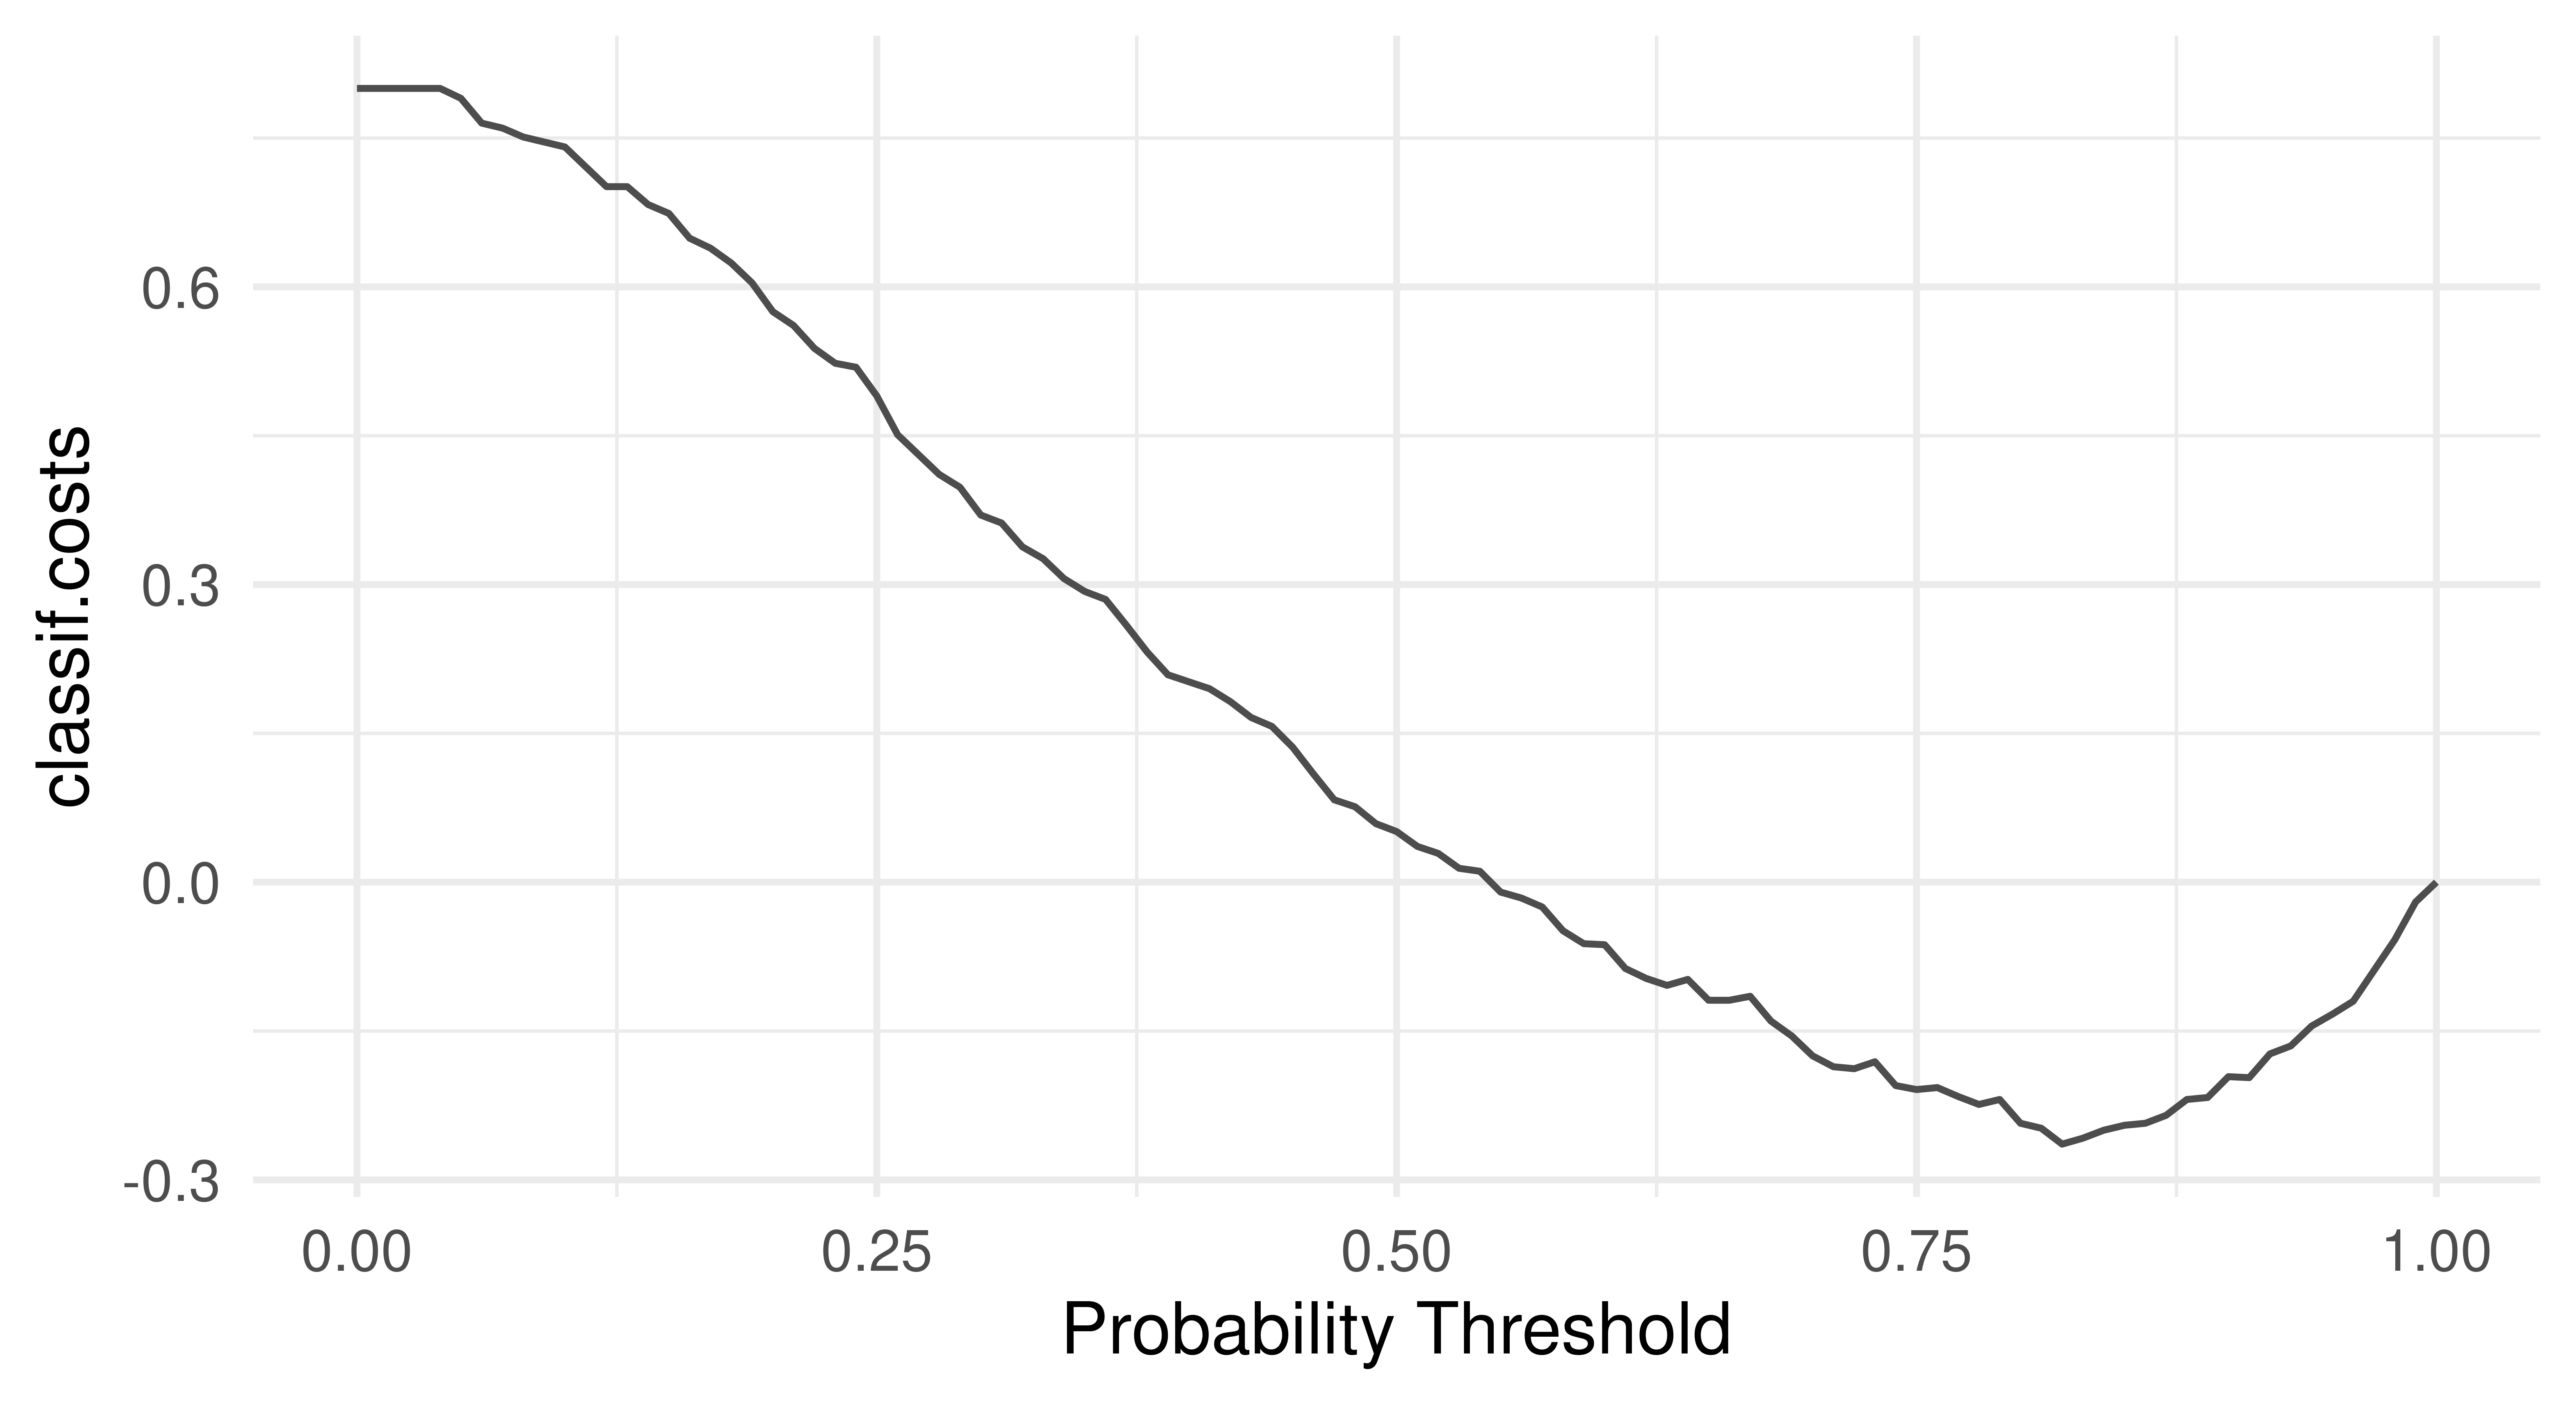 Line graph with x-axis labeled 'Probability Threshold' ranging between 0-1, and y-axis labeled 'classif.costs' ranging between -0.3 and 0.7'. Line starts at (0,0.7) decreases linearly to around (0.8,-0.3) then increases linearly to (1, 0).